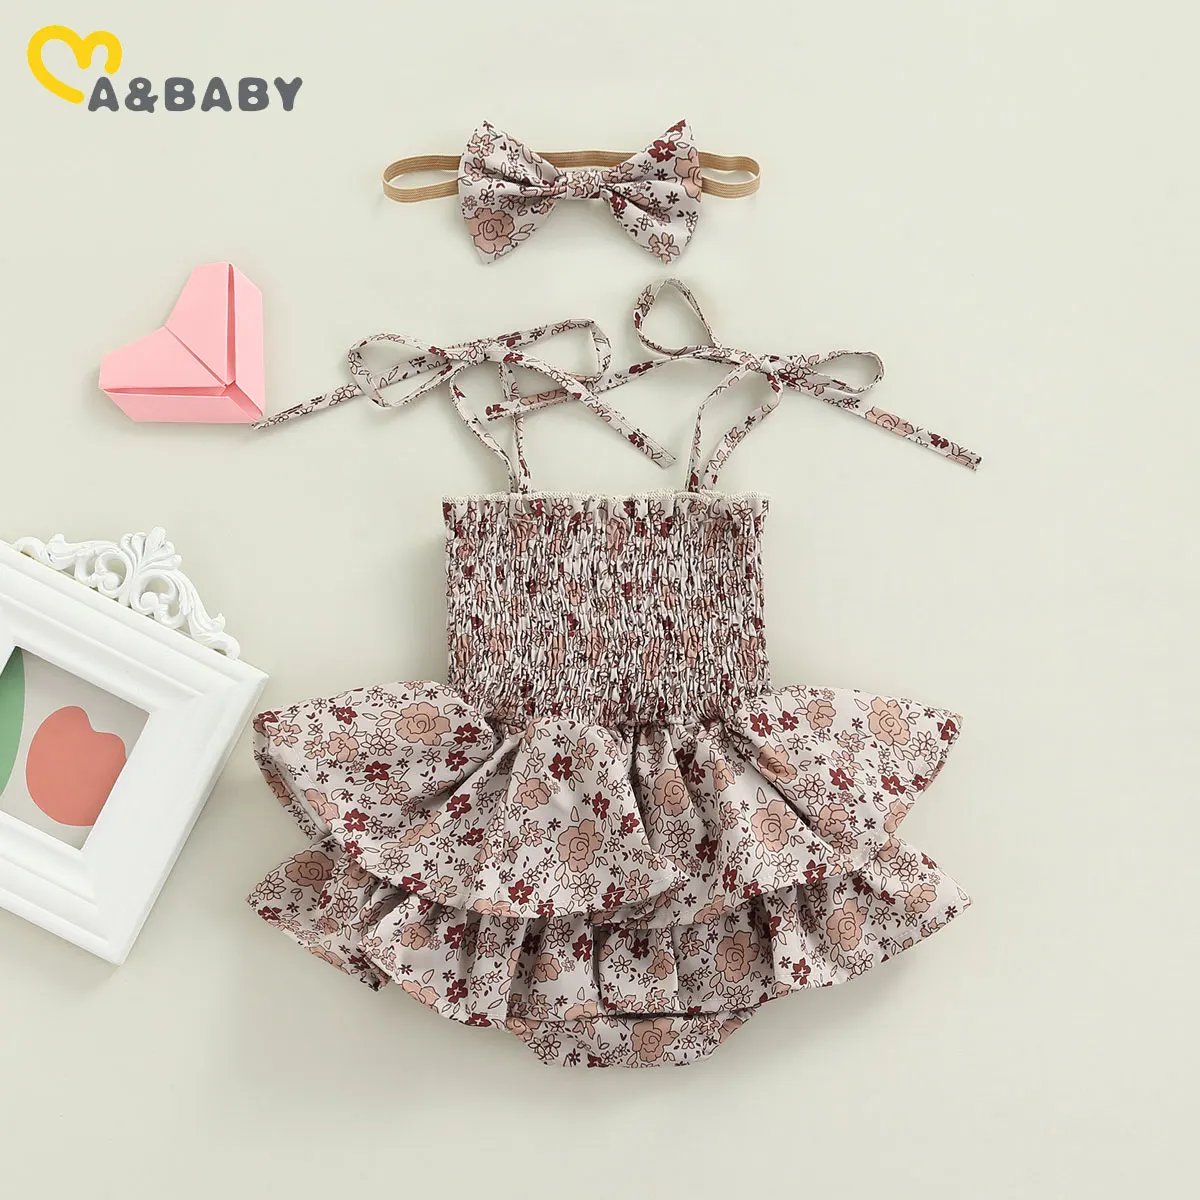 

ma&baby 0-18M Newborn Infant Baby Girls Romper Floral Print Ruffle Jumpsuit Playsuit Summer Clothing Sleeveless Sunsuit Overall